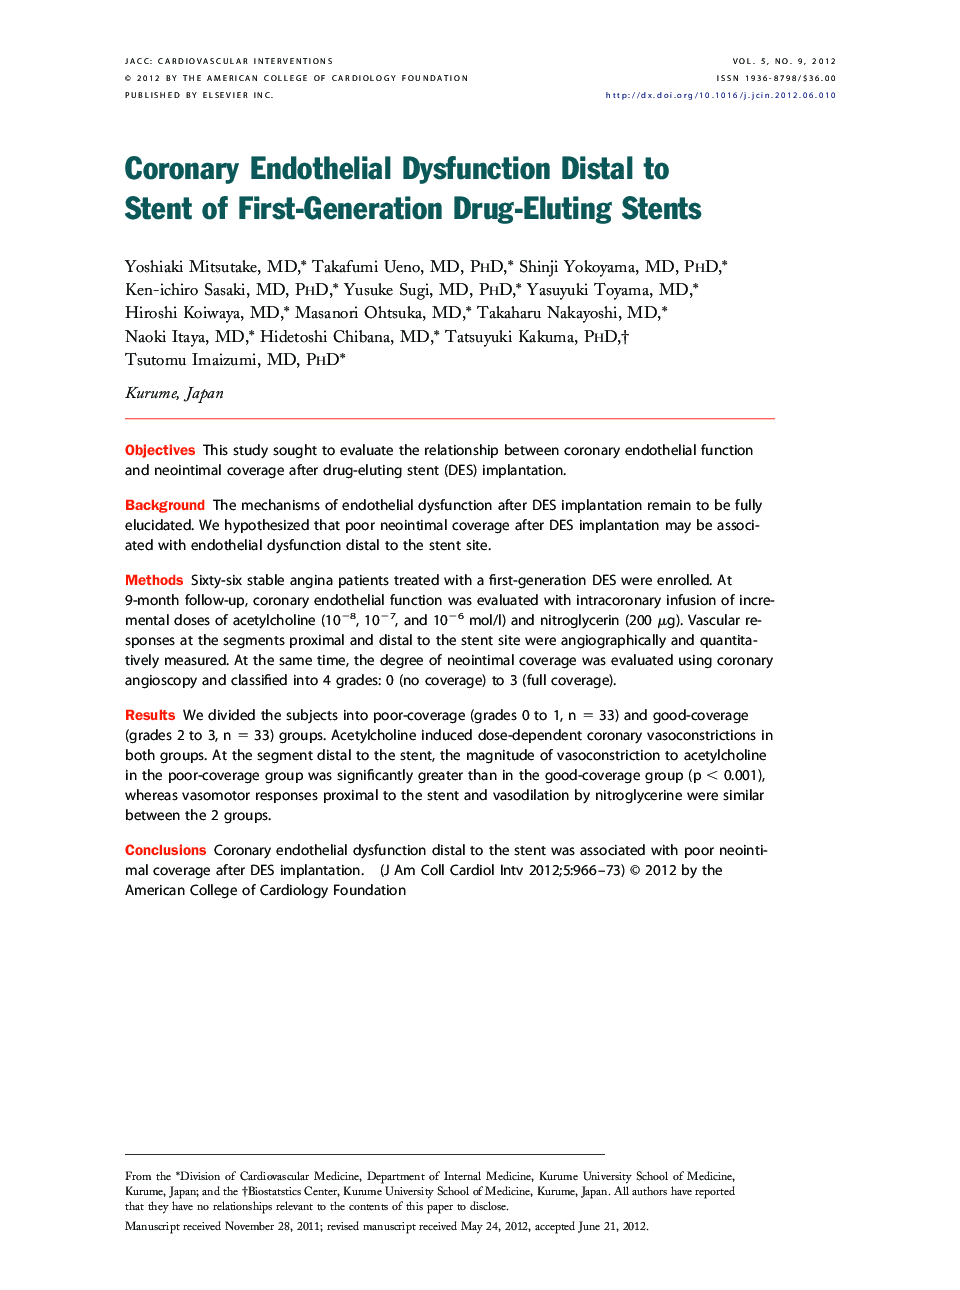 Coronary Endothelial Dysfunction Distal to Stent of First-Generation Drug-Eluting Stents 